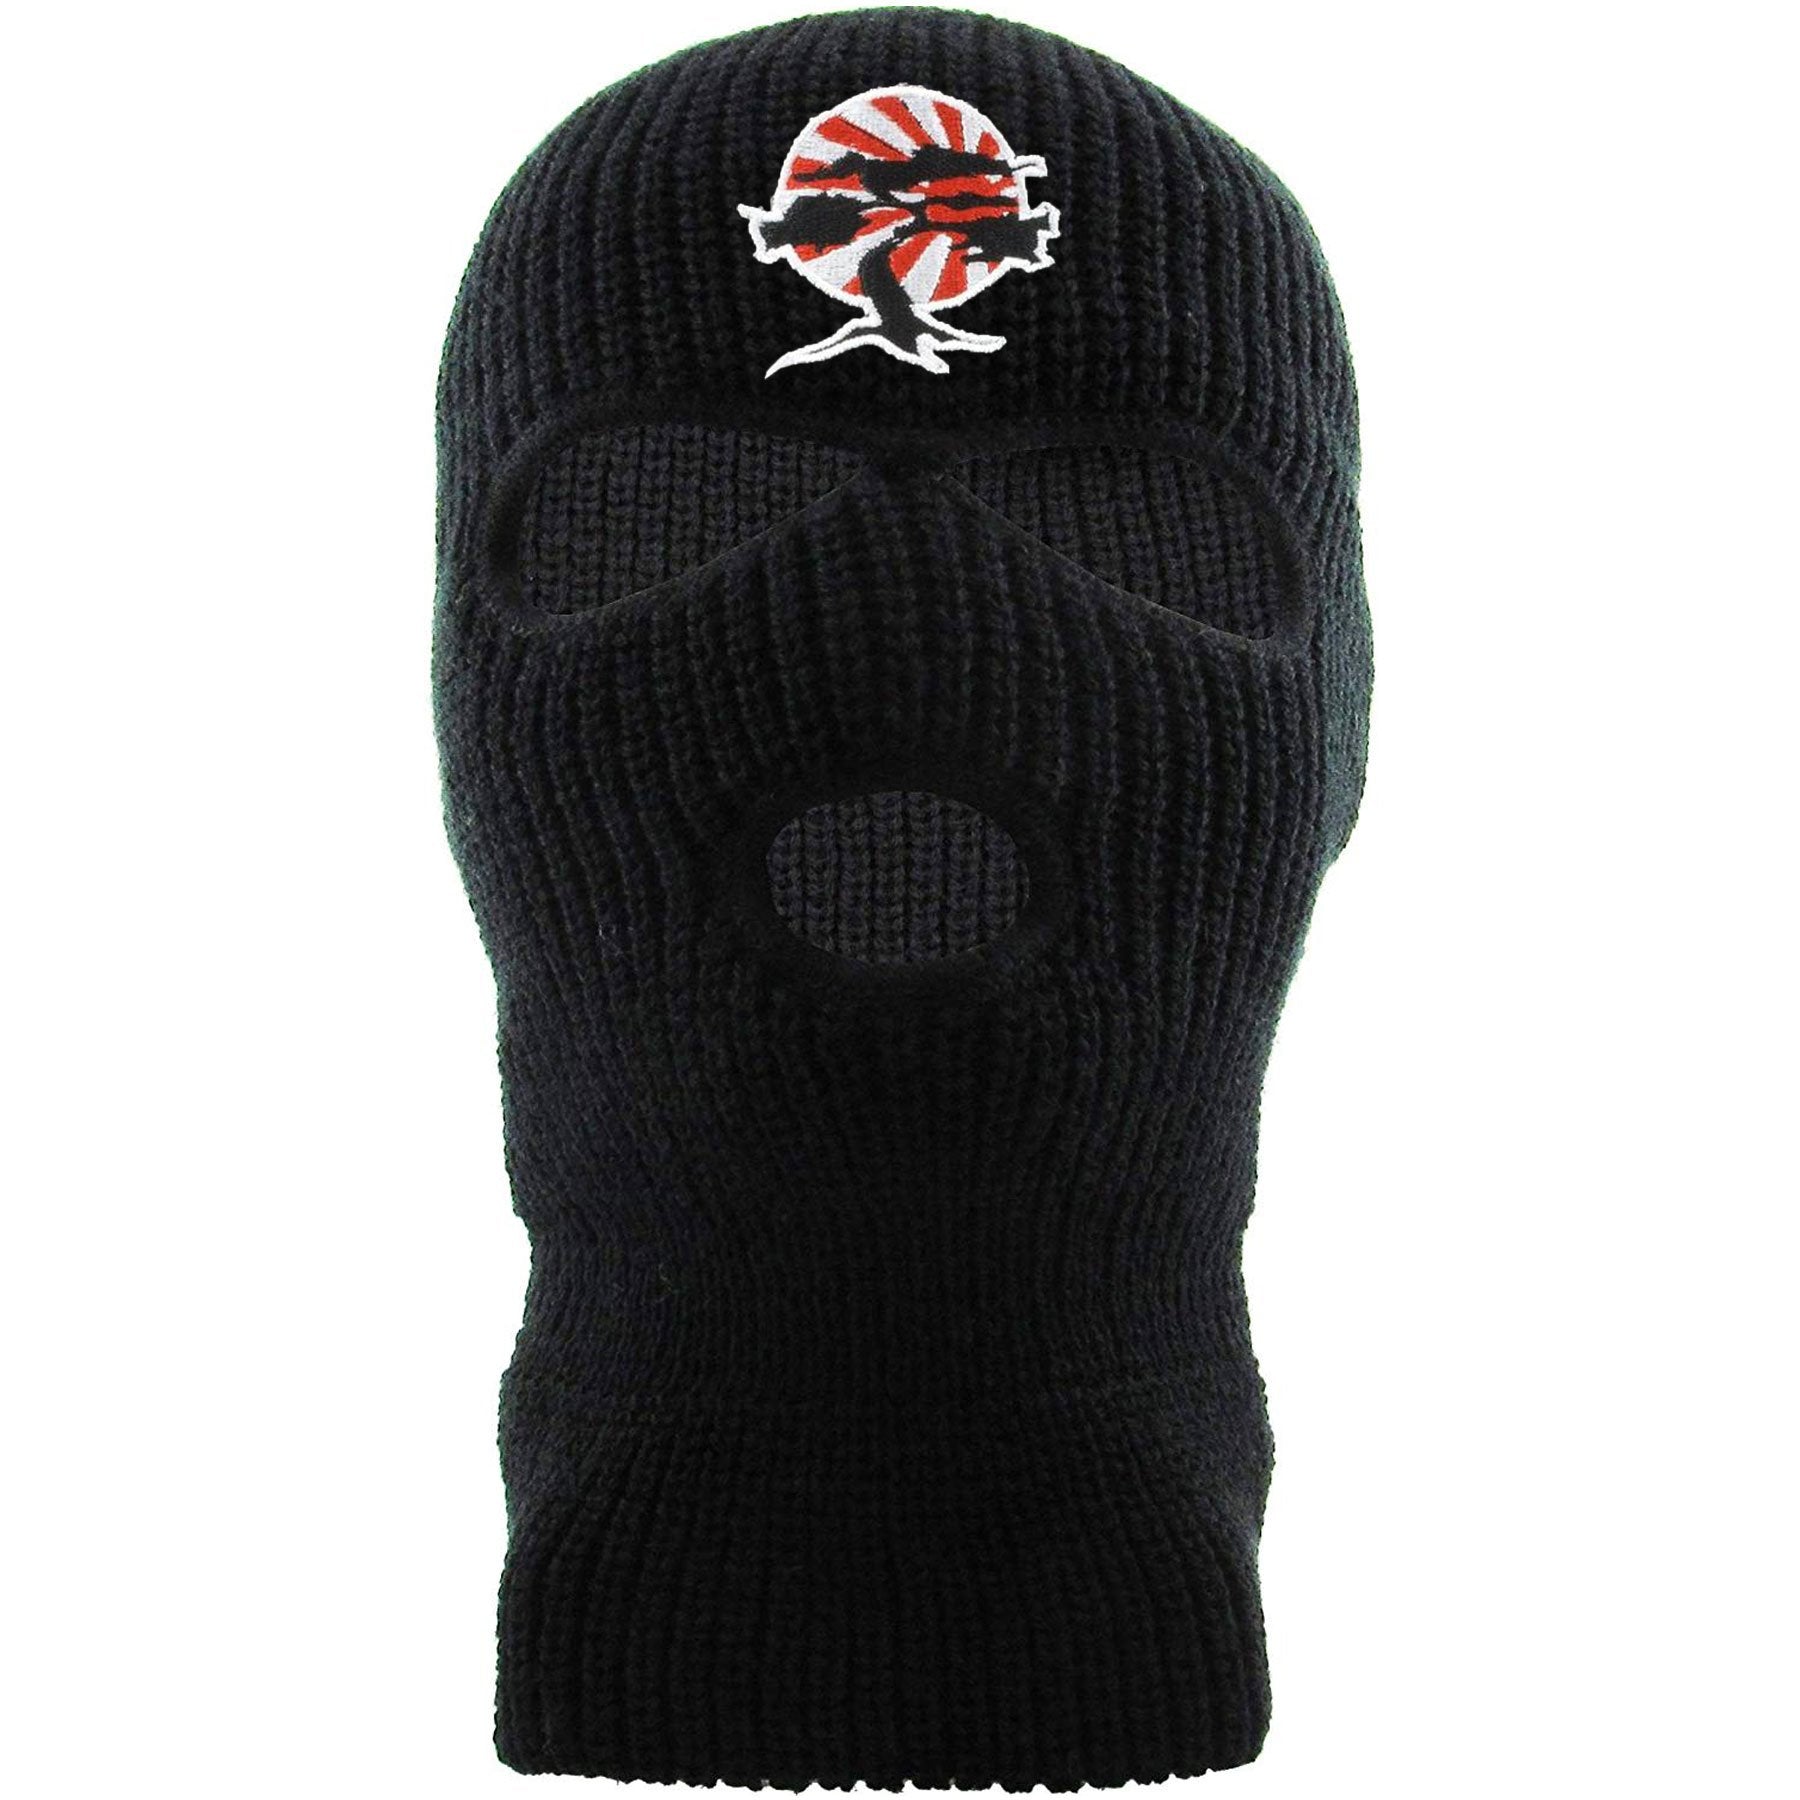 Embroidered on the front of the Foot Clan Bonsai Tree black ski mask is the Foot Clan Bonsai Tree Rising Sun logo